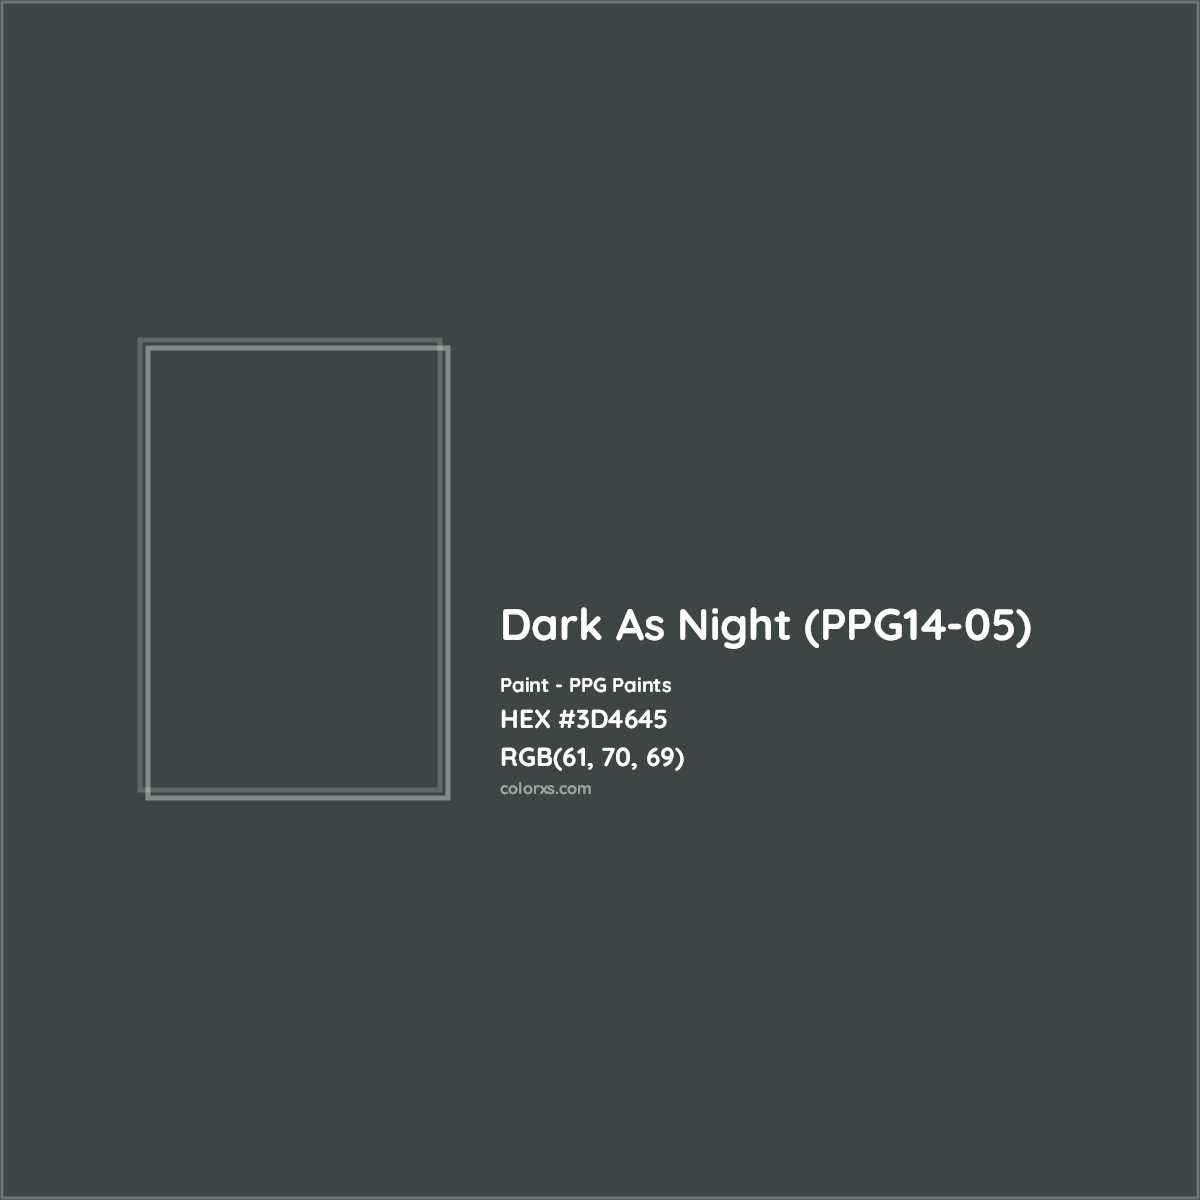 HEX #3D4645 Dark As Night (PPG14-05) Paint PPG Paints - Color Code